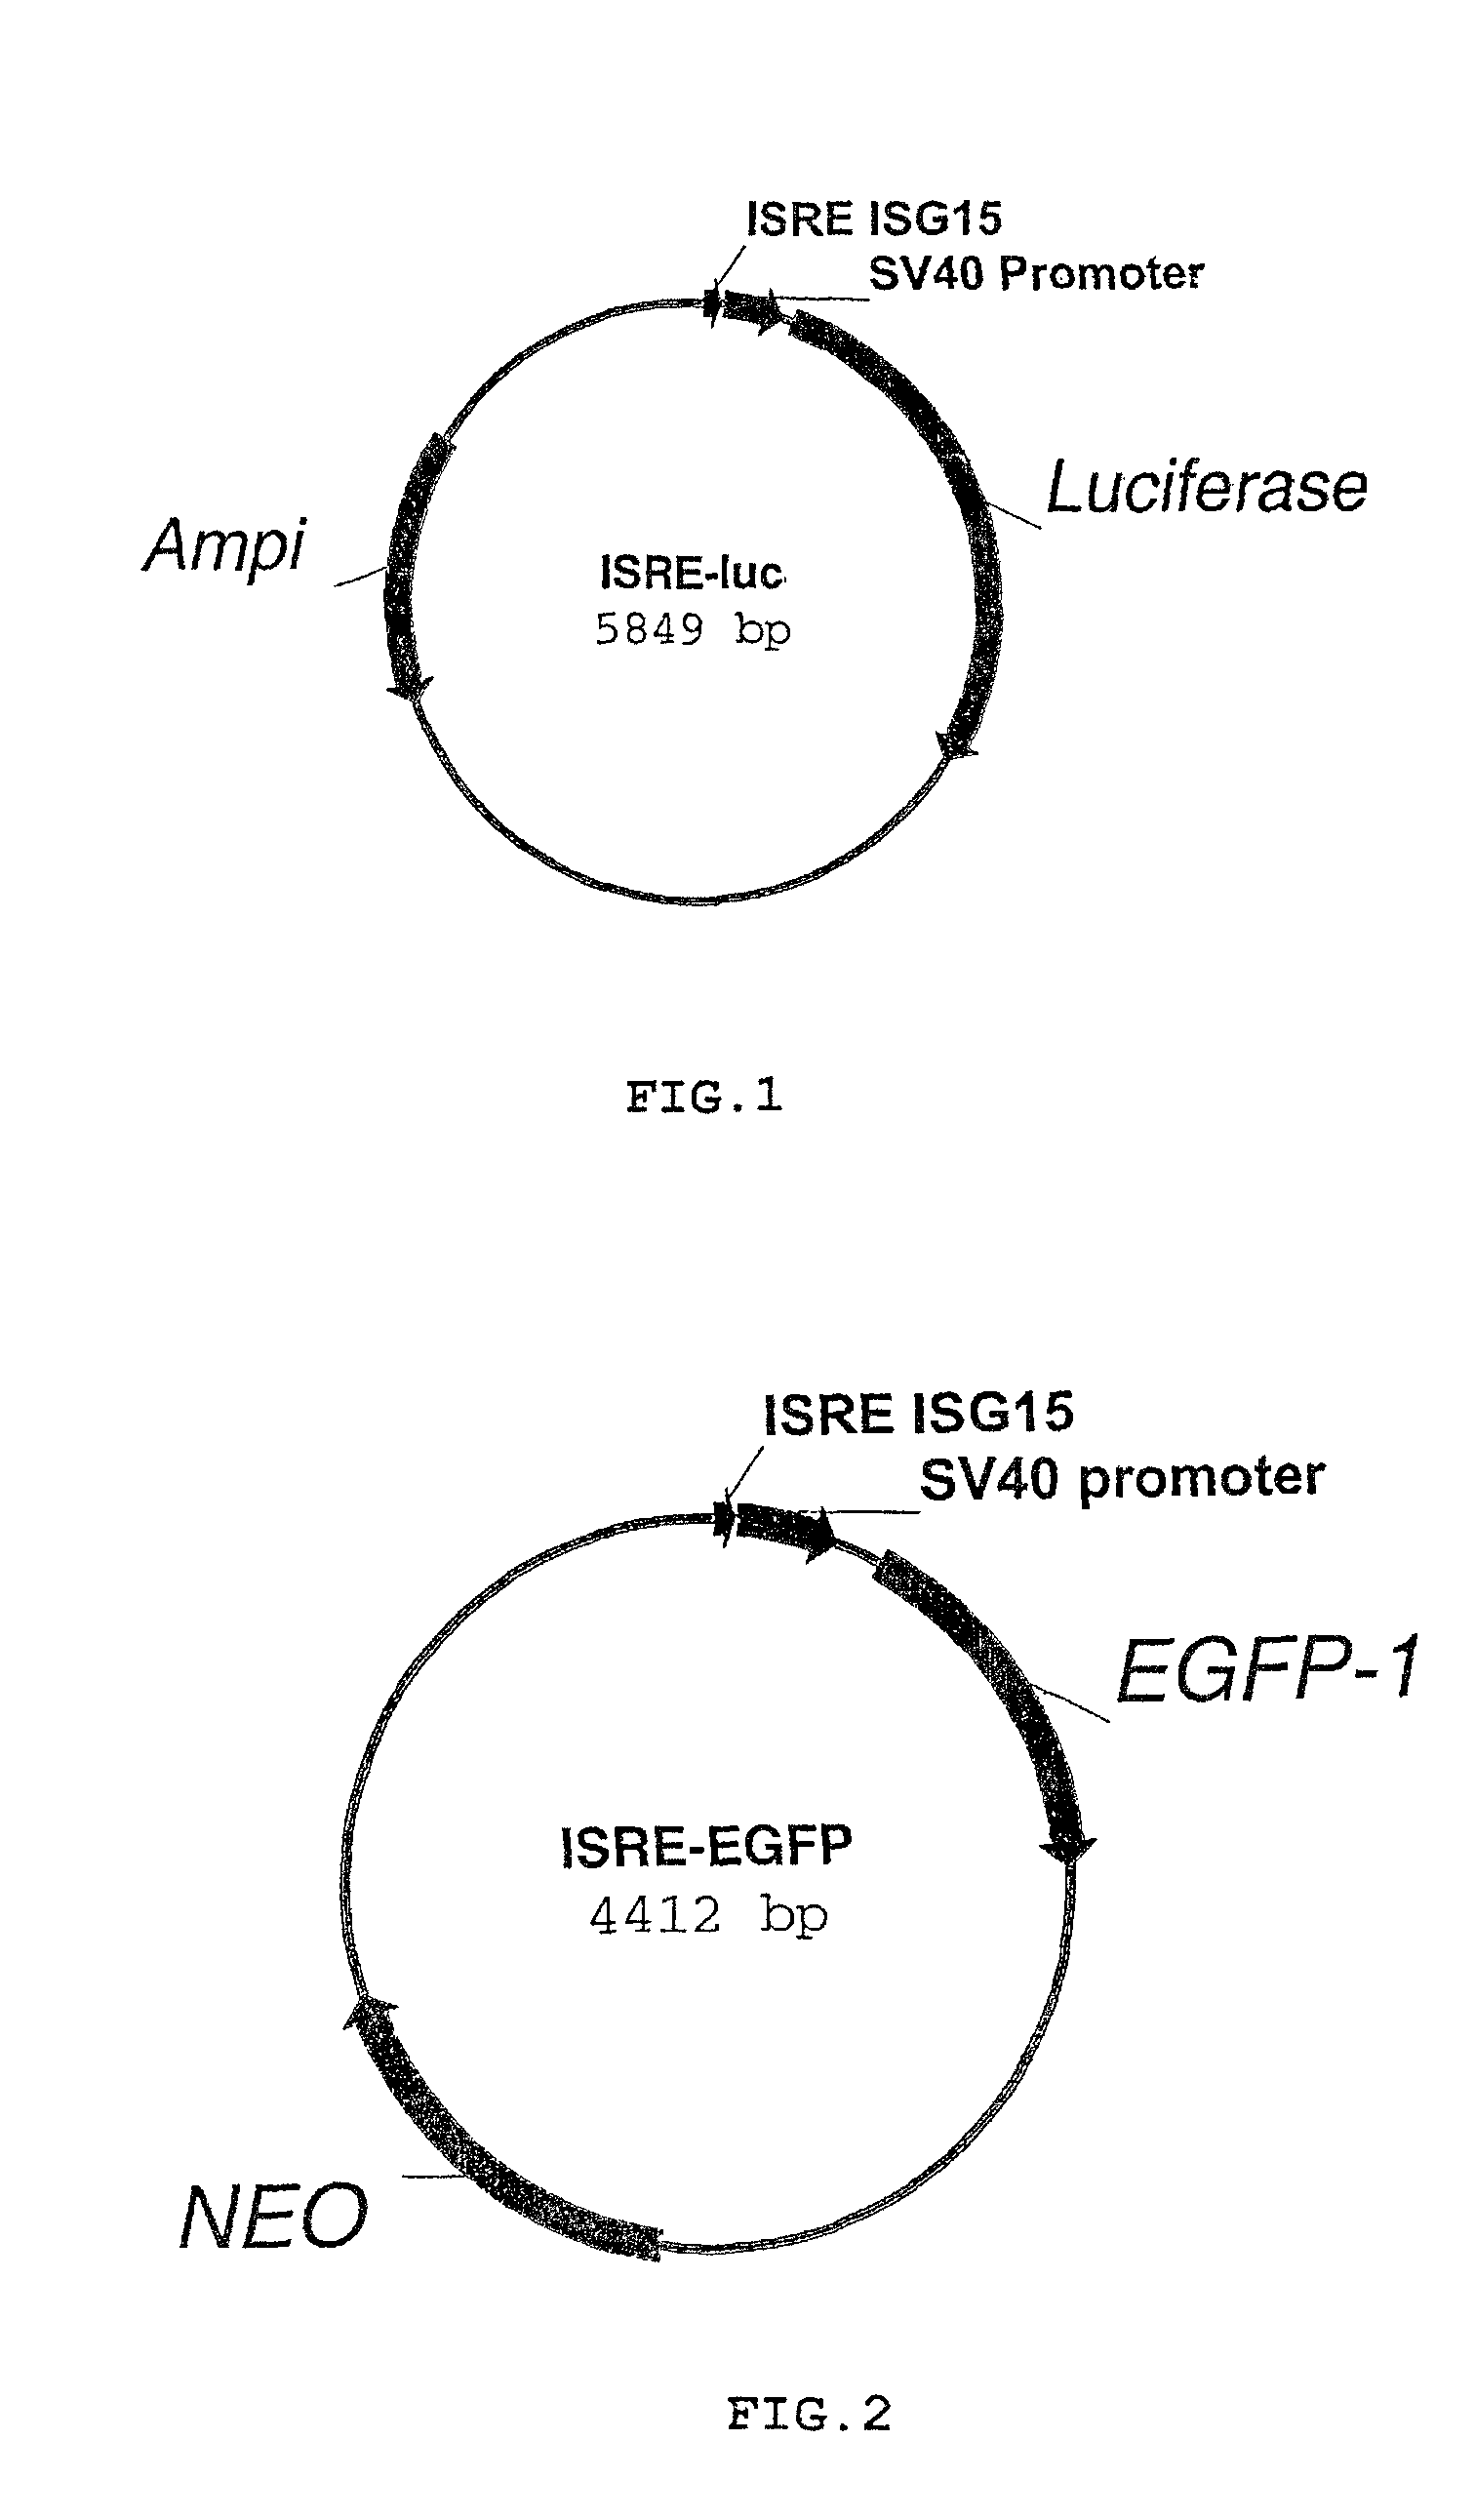 Method for conducting an assay for neutralizing antibodies